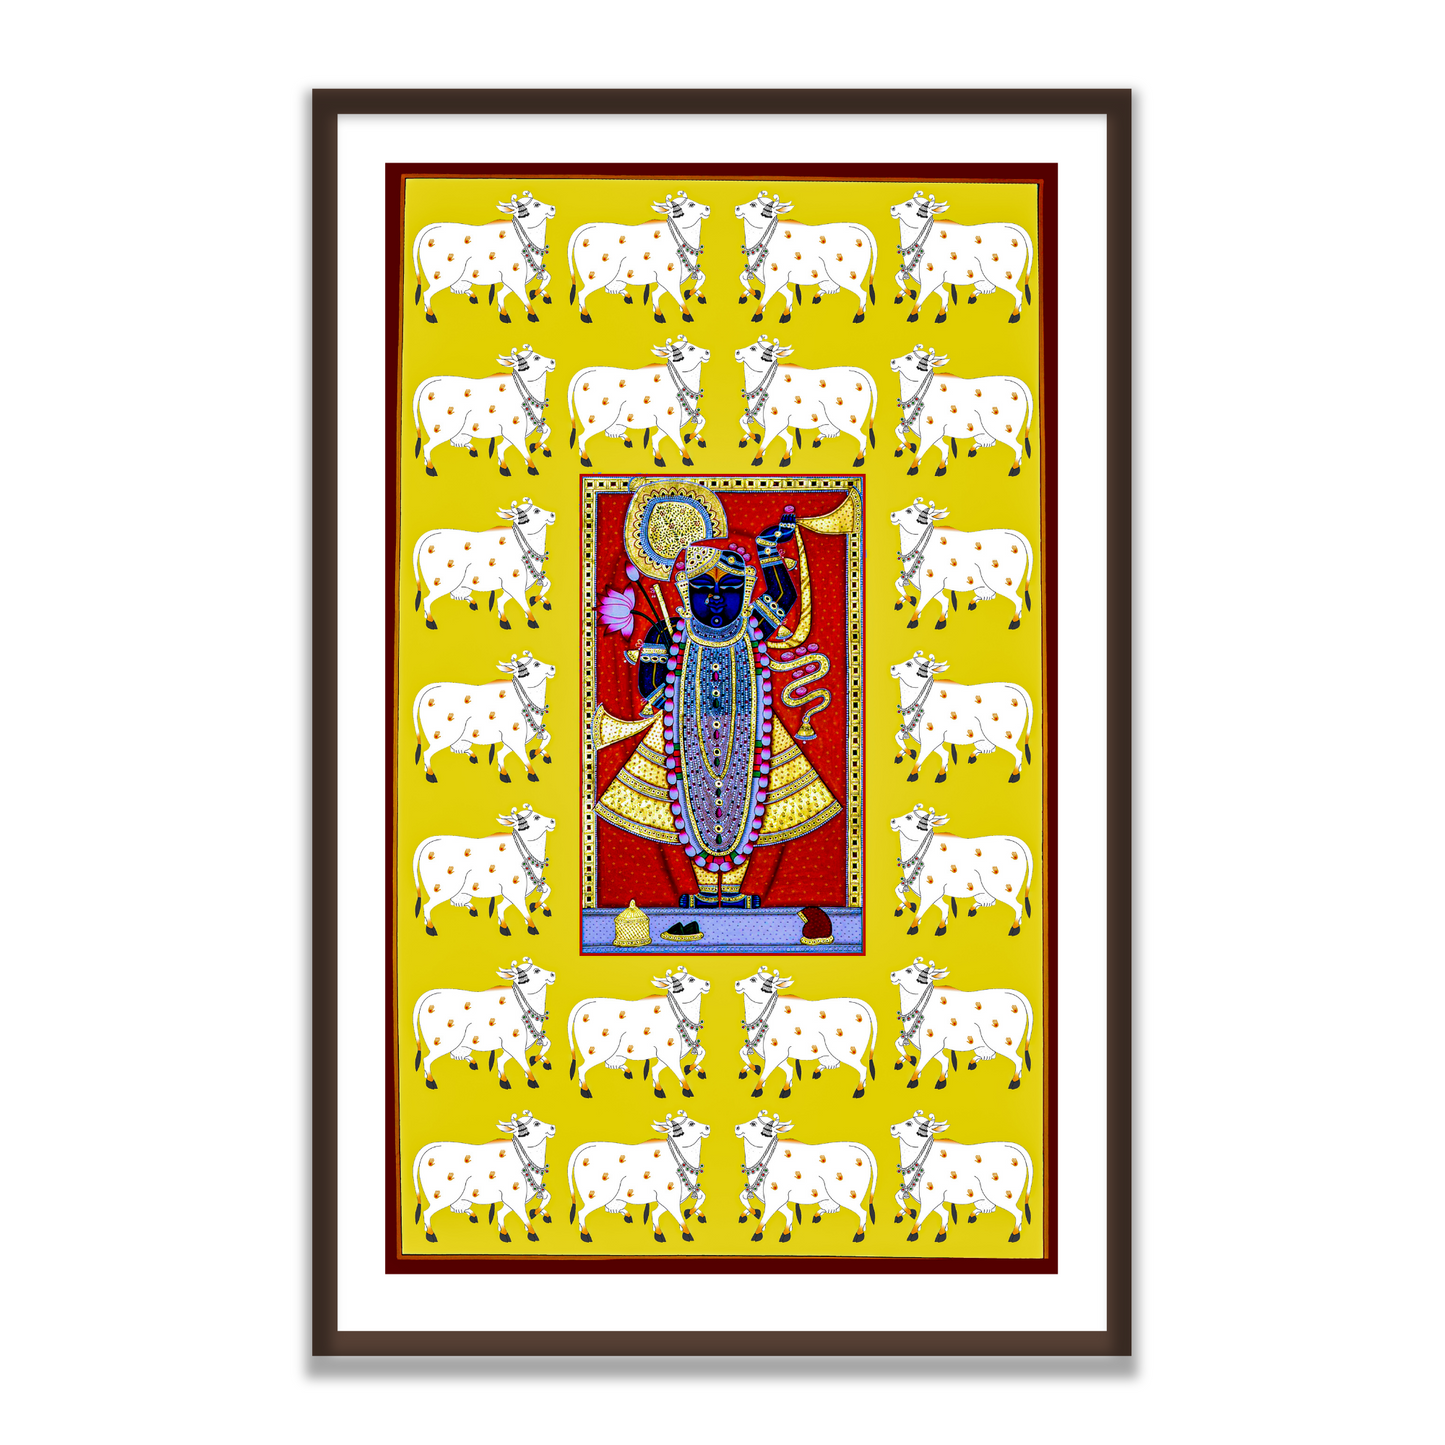 Shrinath Ji Gold Painting with Pichwai Cow | Framed Indian Wall Art